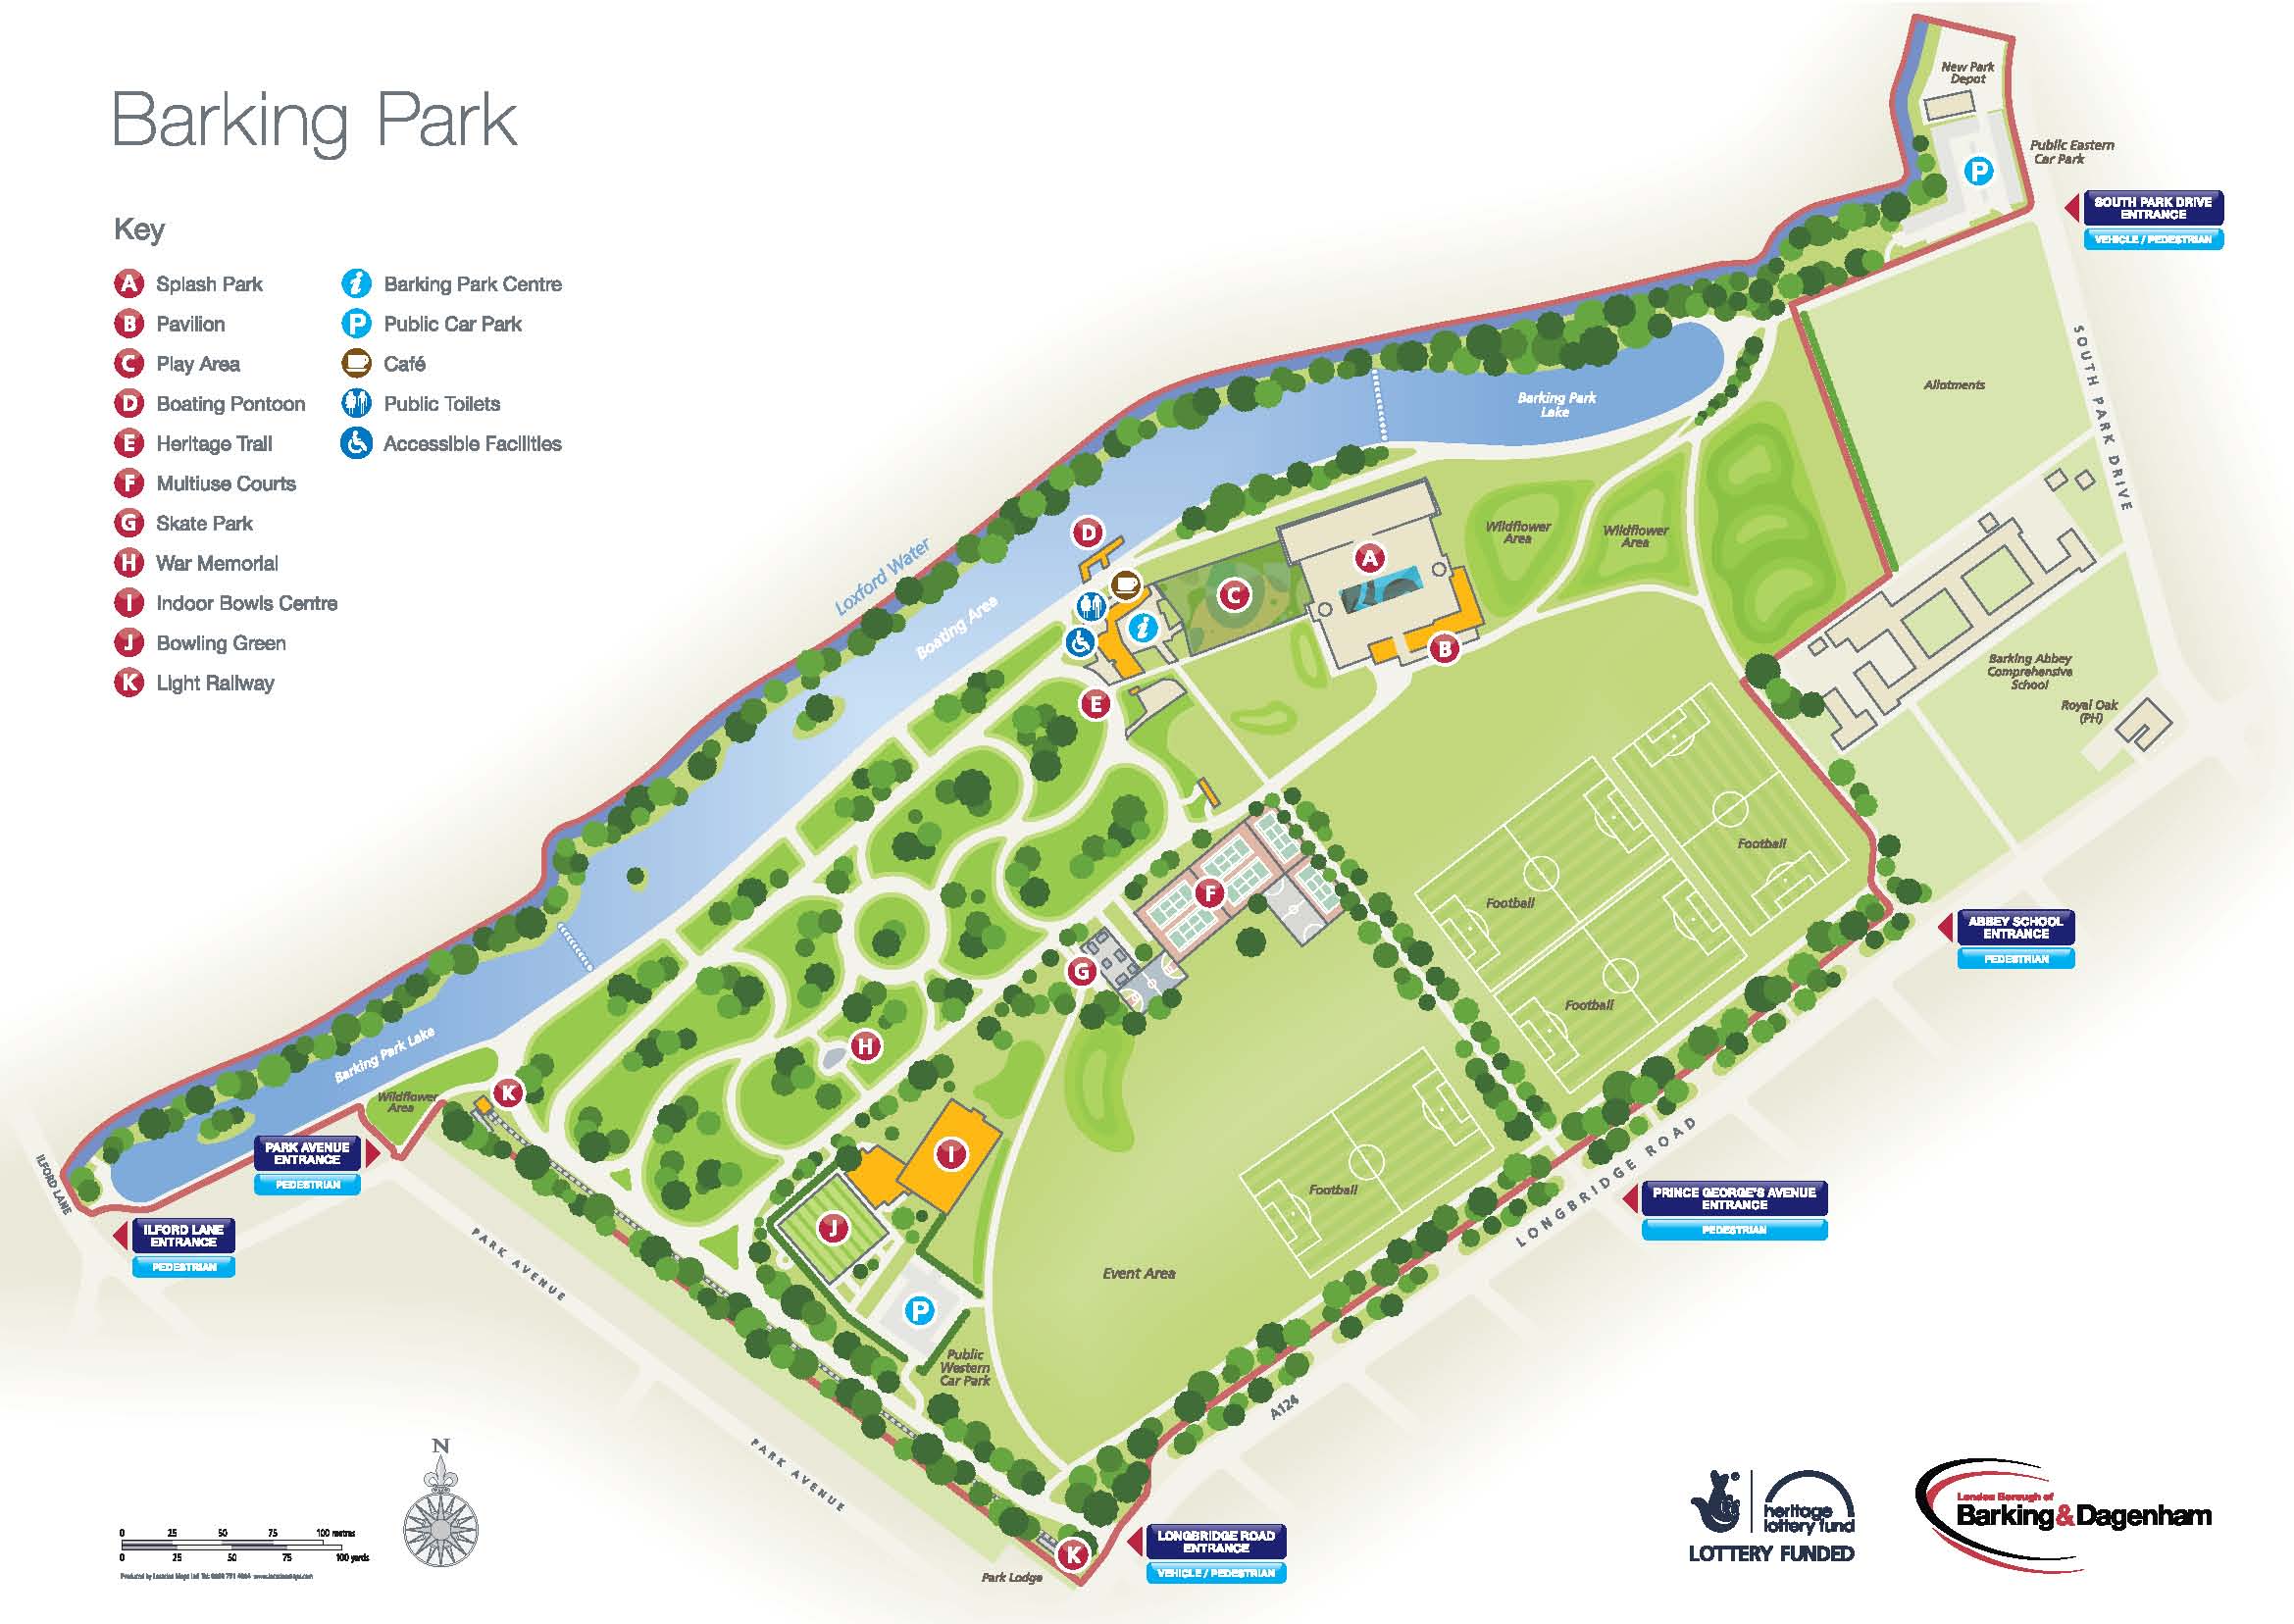 2D Pictorial Site Plan for Parks and Gardens - Location Maps